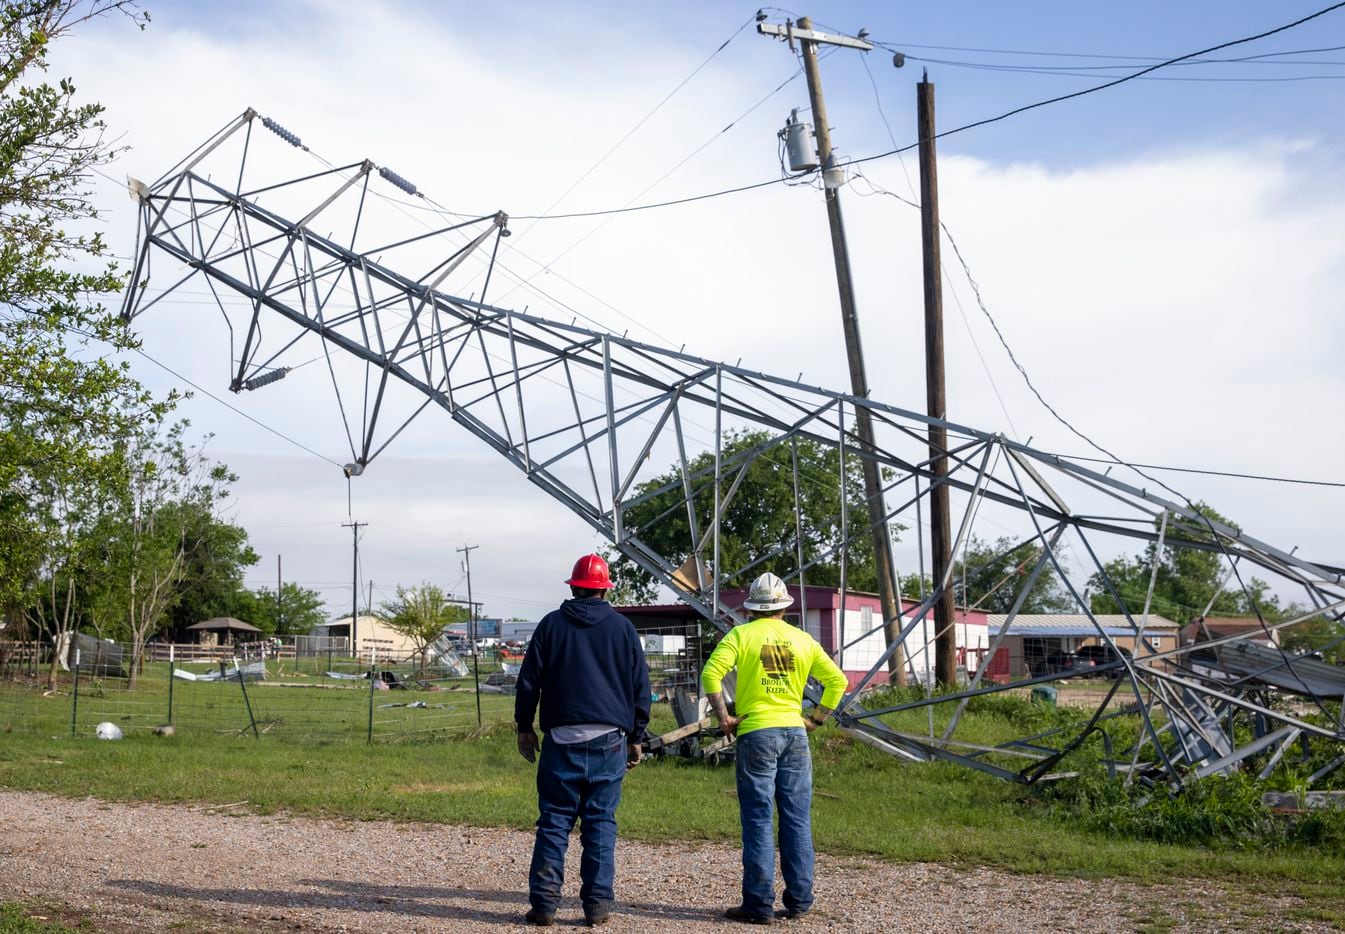 Oncor personnel survey a downed power structure where a Monday night tornado touched down just south of Waxahachie, Texas, on Tuesday, May 4, 2021. (Lynda M. González/The Dallas Morning News)